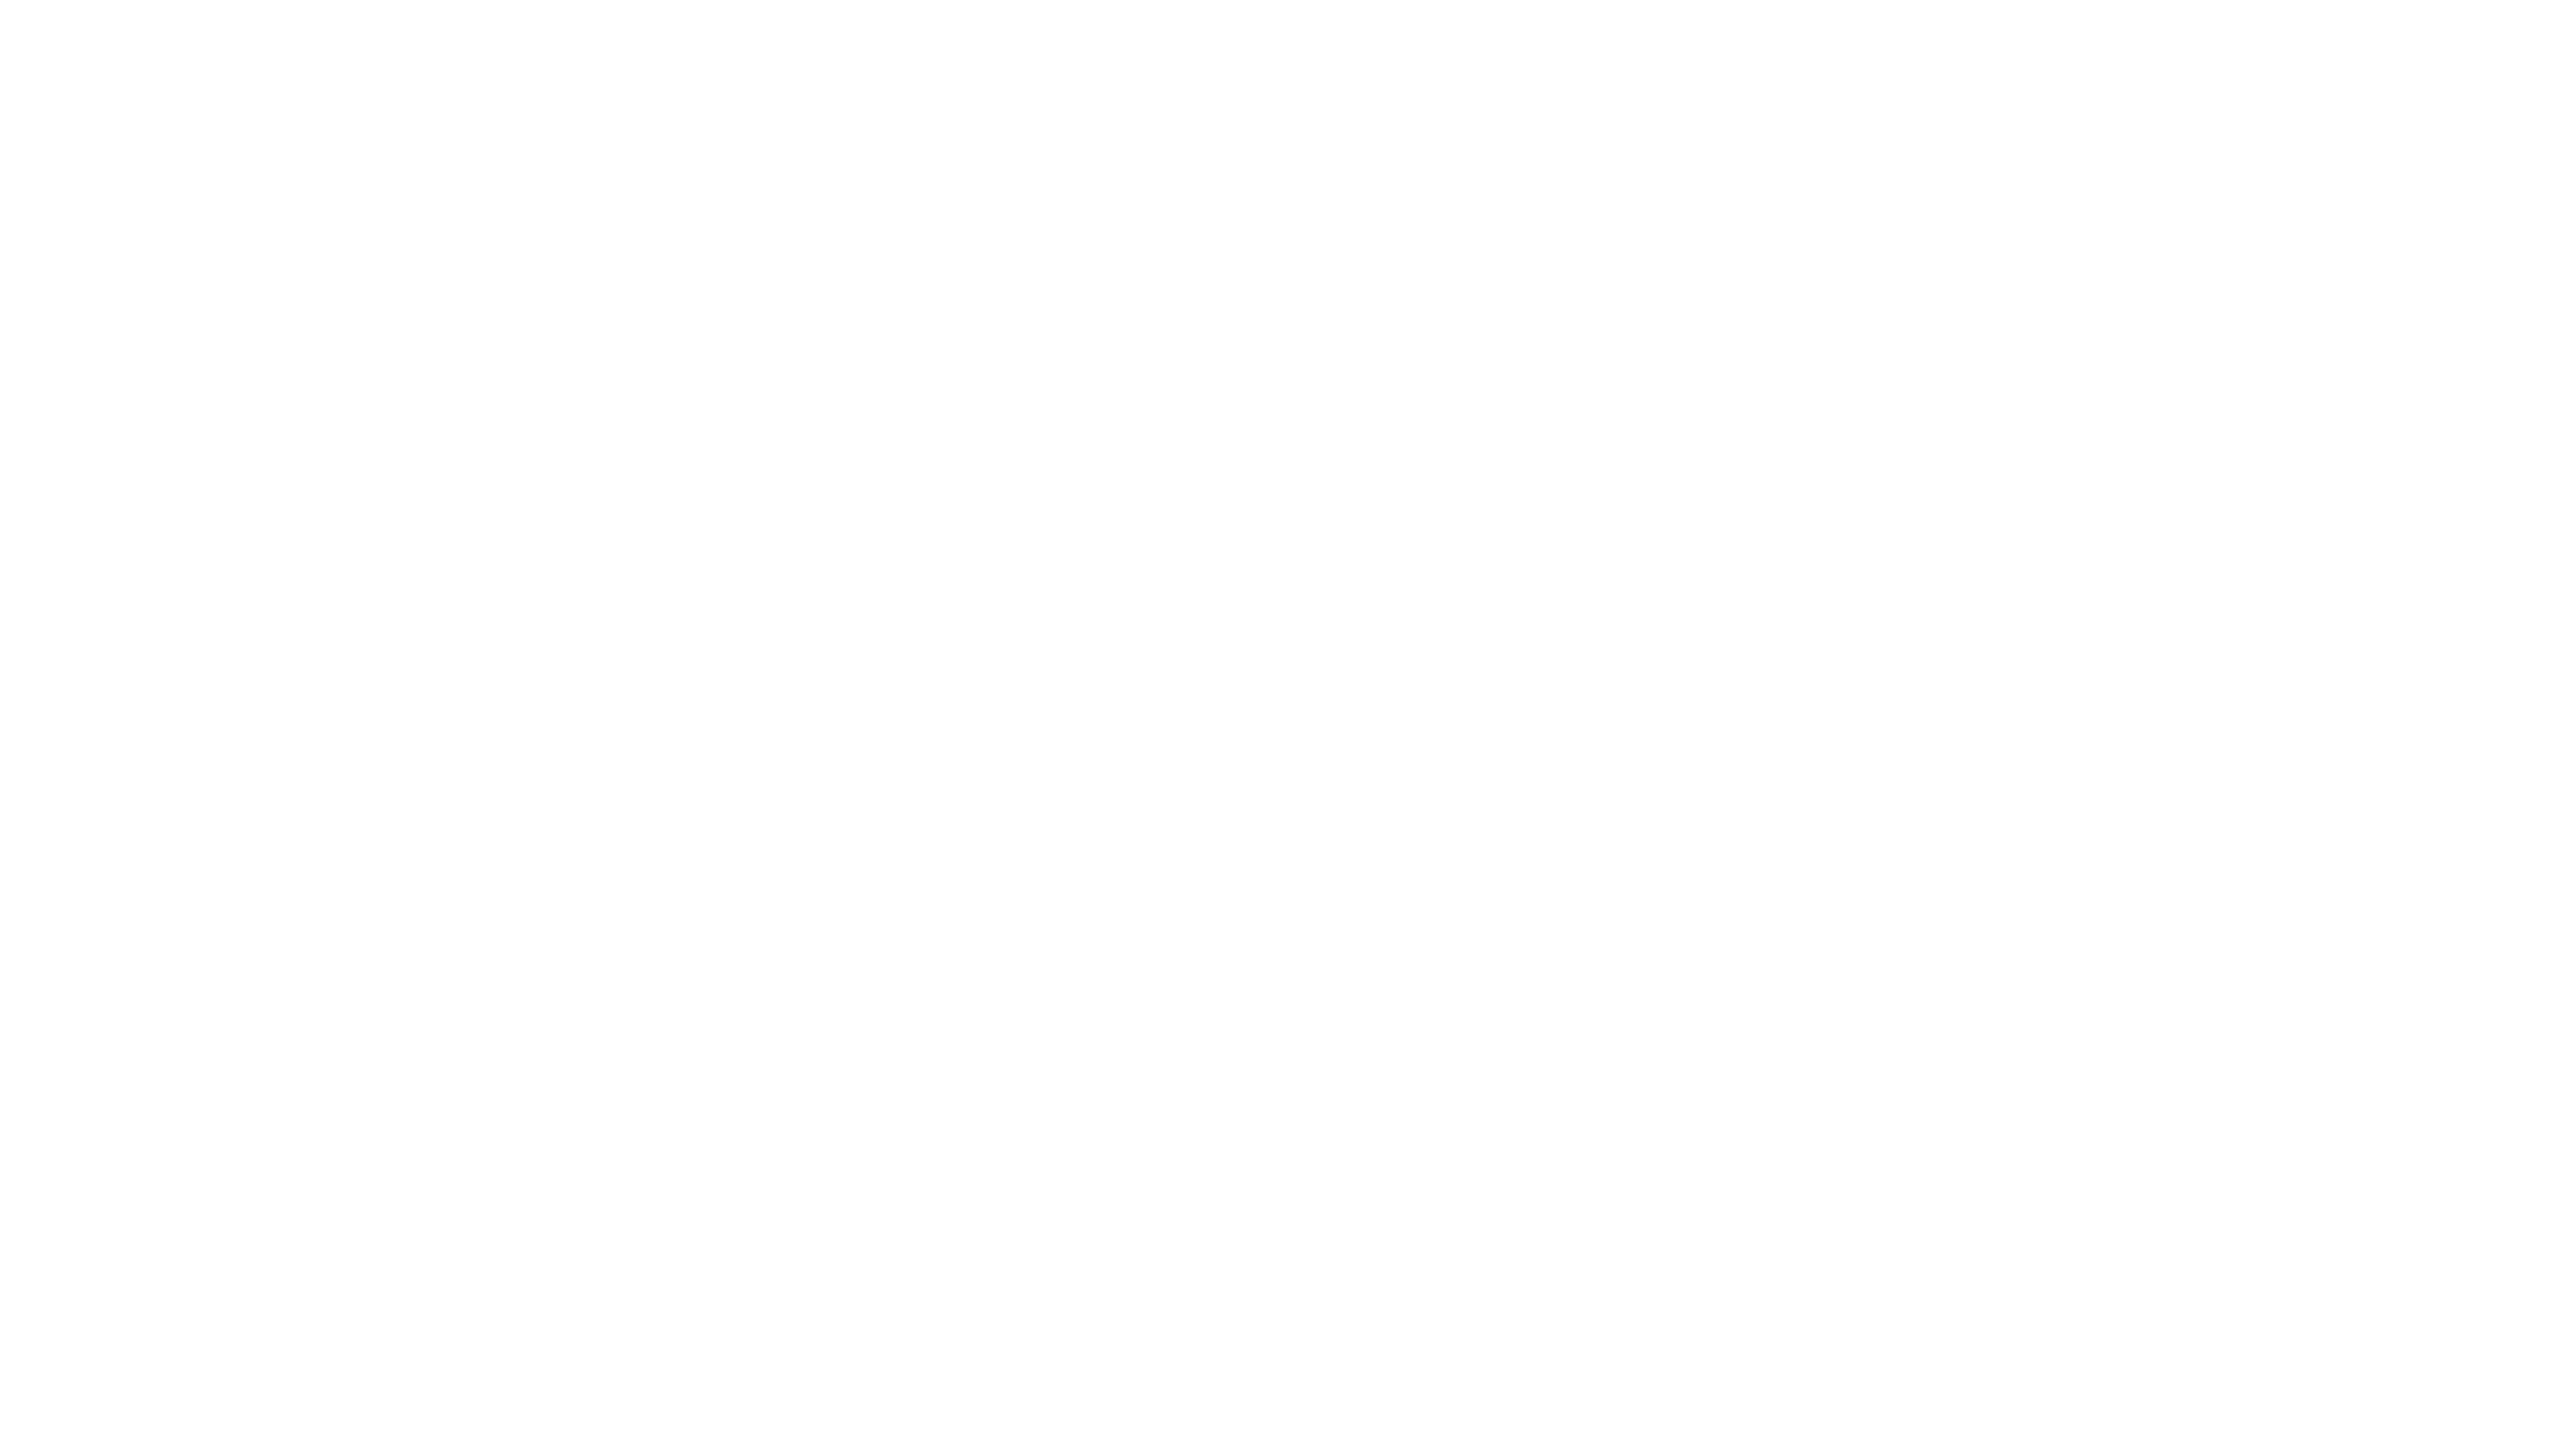 Avalanche Pictures Company